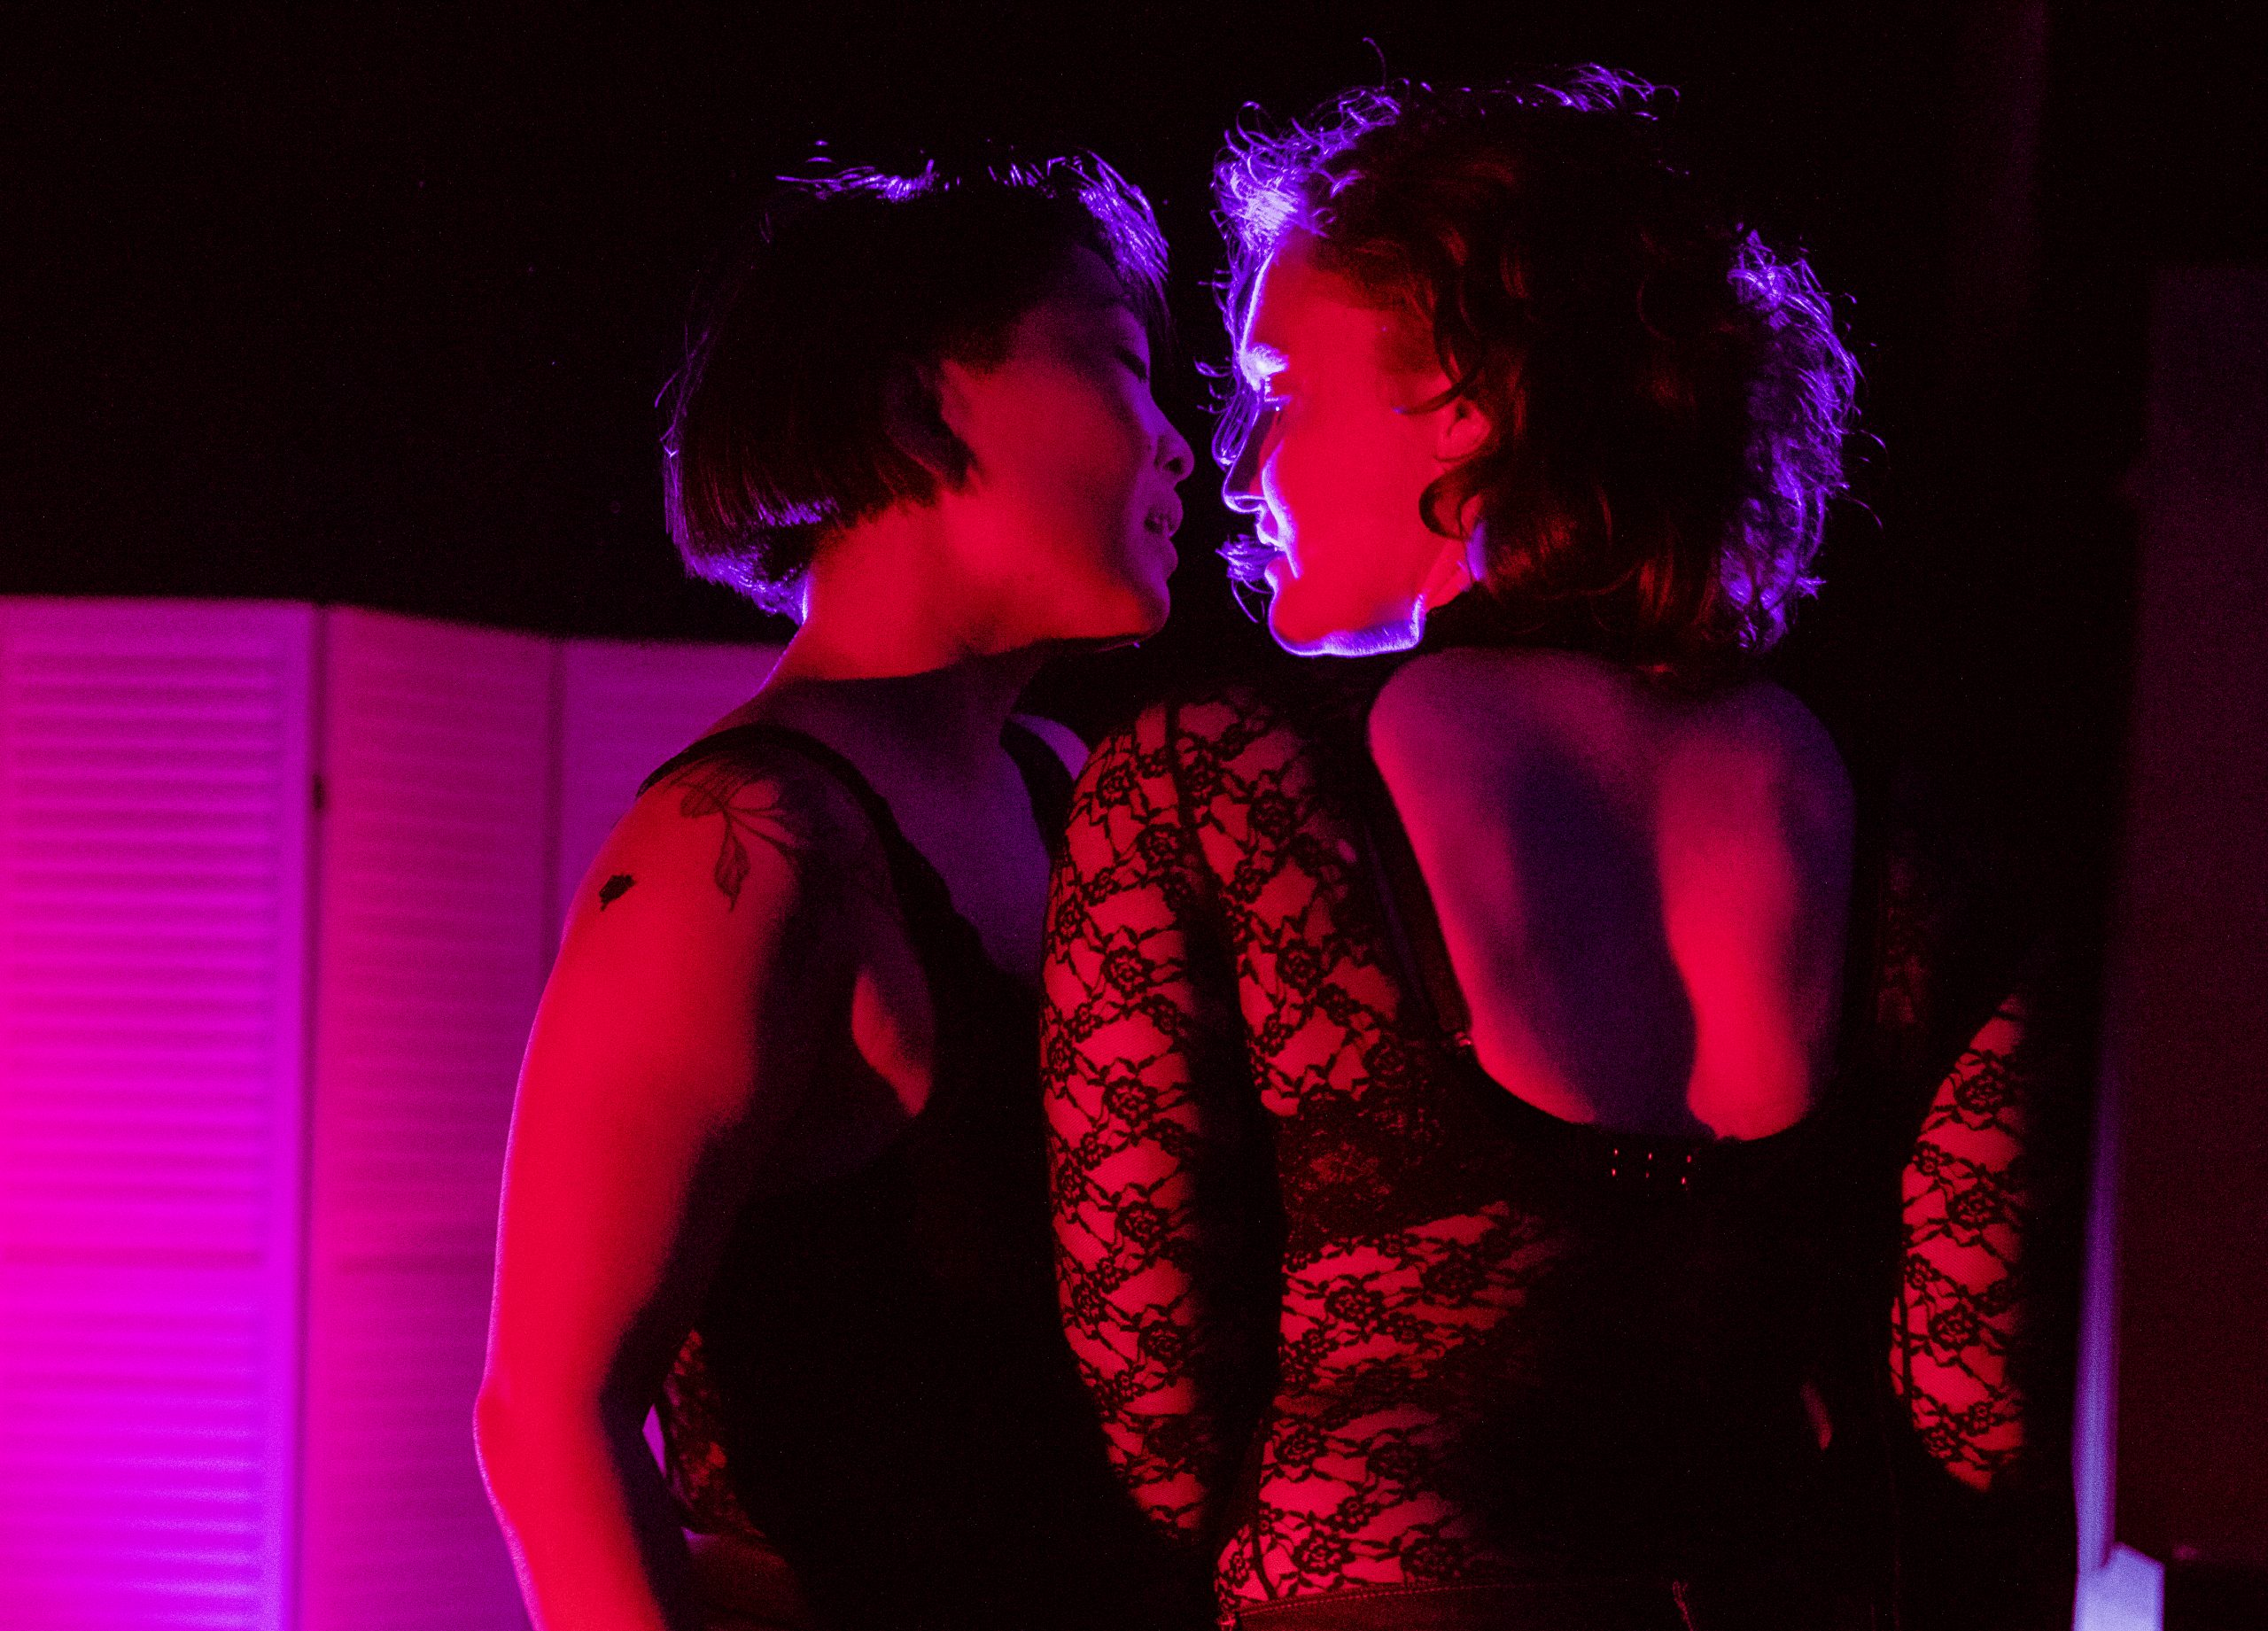 Two women lit in red and pink hold their faces close to one another almost kissing